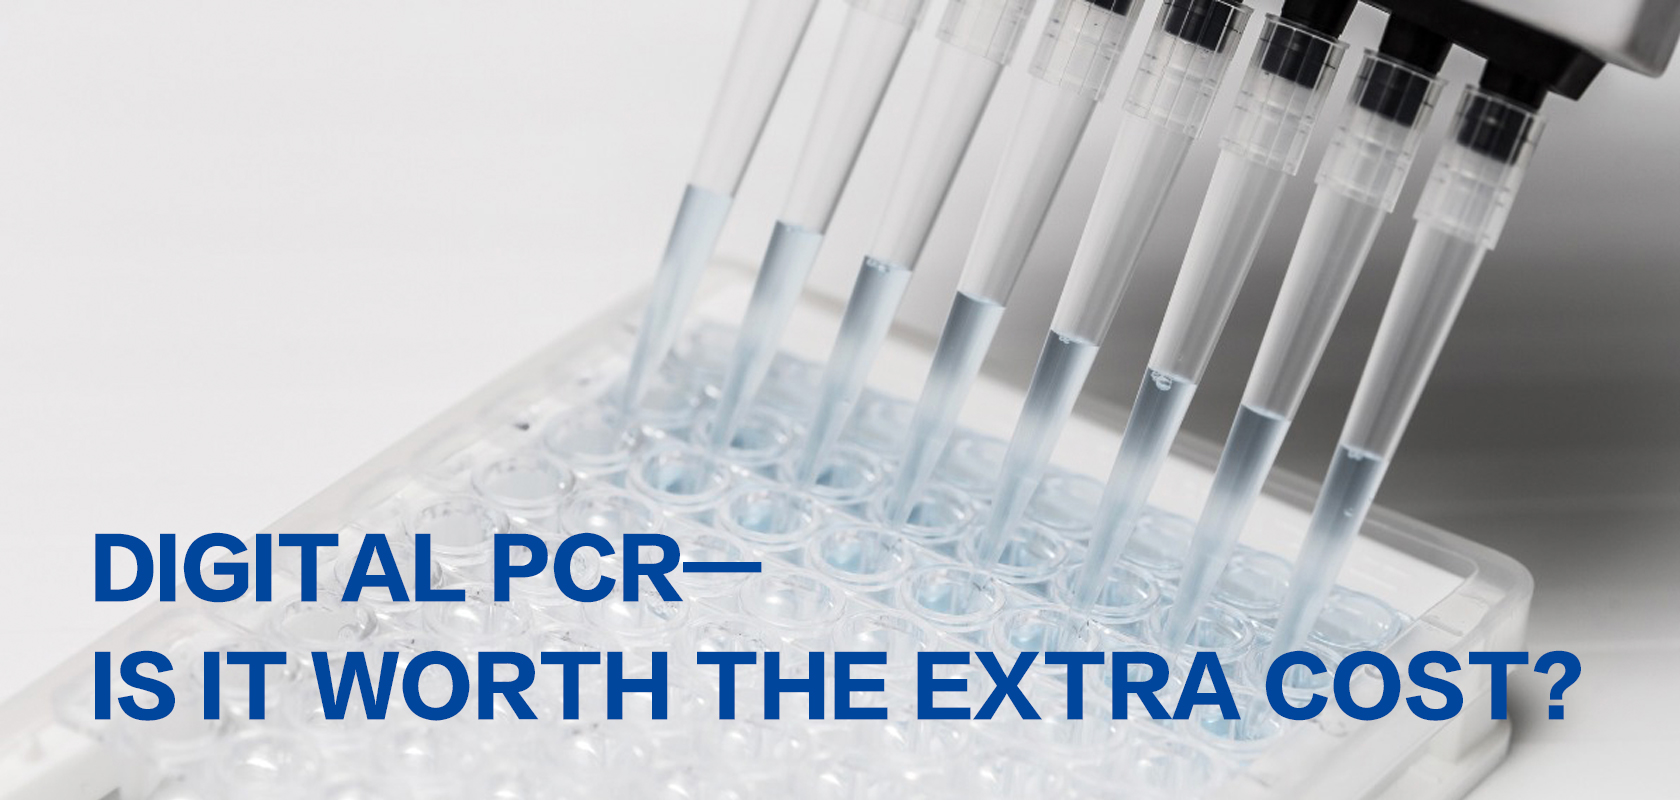 DIGITAL PCR—IS IT WORTH THE EXTRA COST?